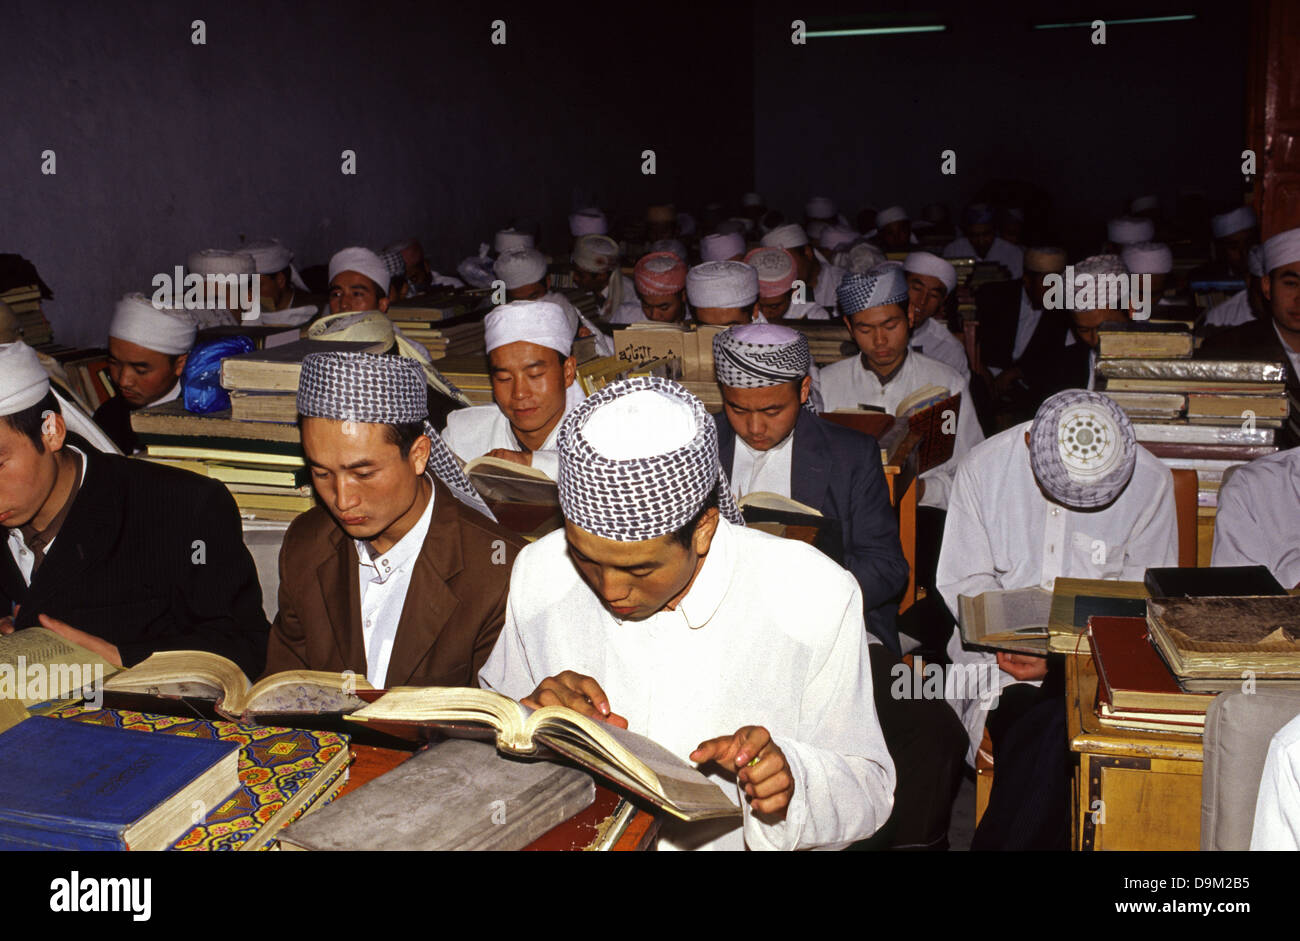 Hui Muslim men studying the Quran at madrassa classroom in Dongguan Grand Mosque in Xining the capital of Qinghai province in western China Stock Photo